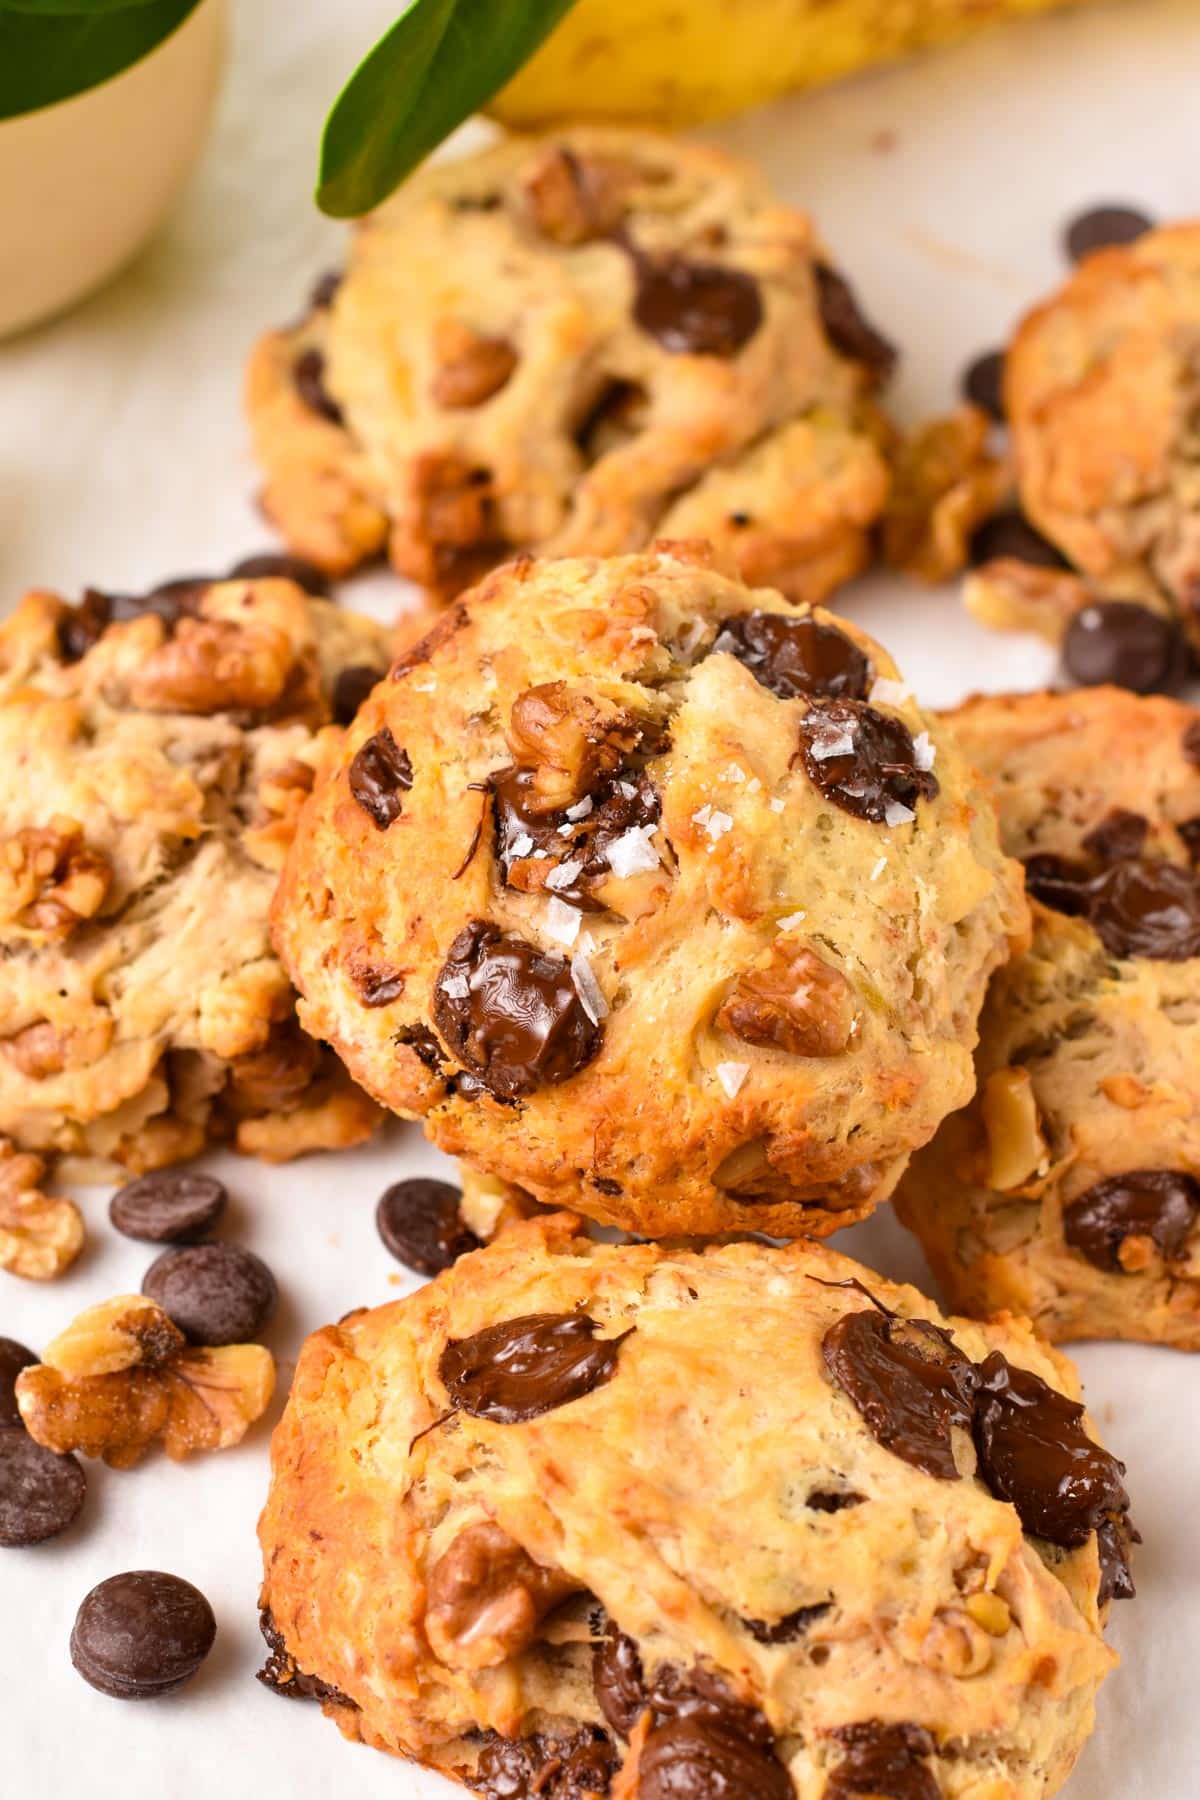 Soft banana bread cookies with chocolate chips, walnuts and pinch of salt.